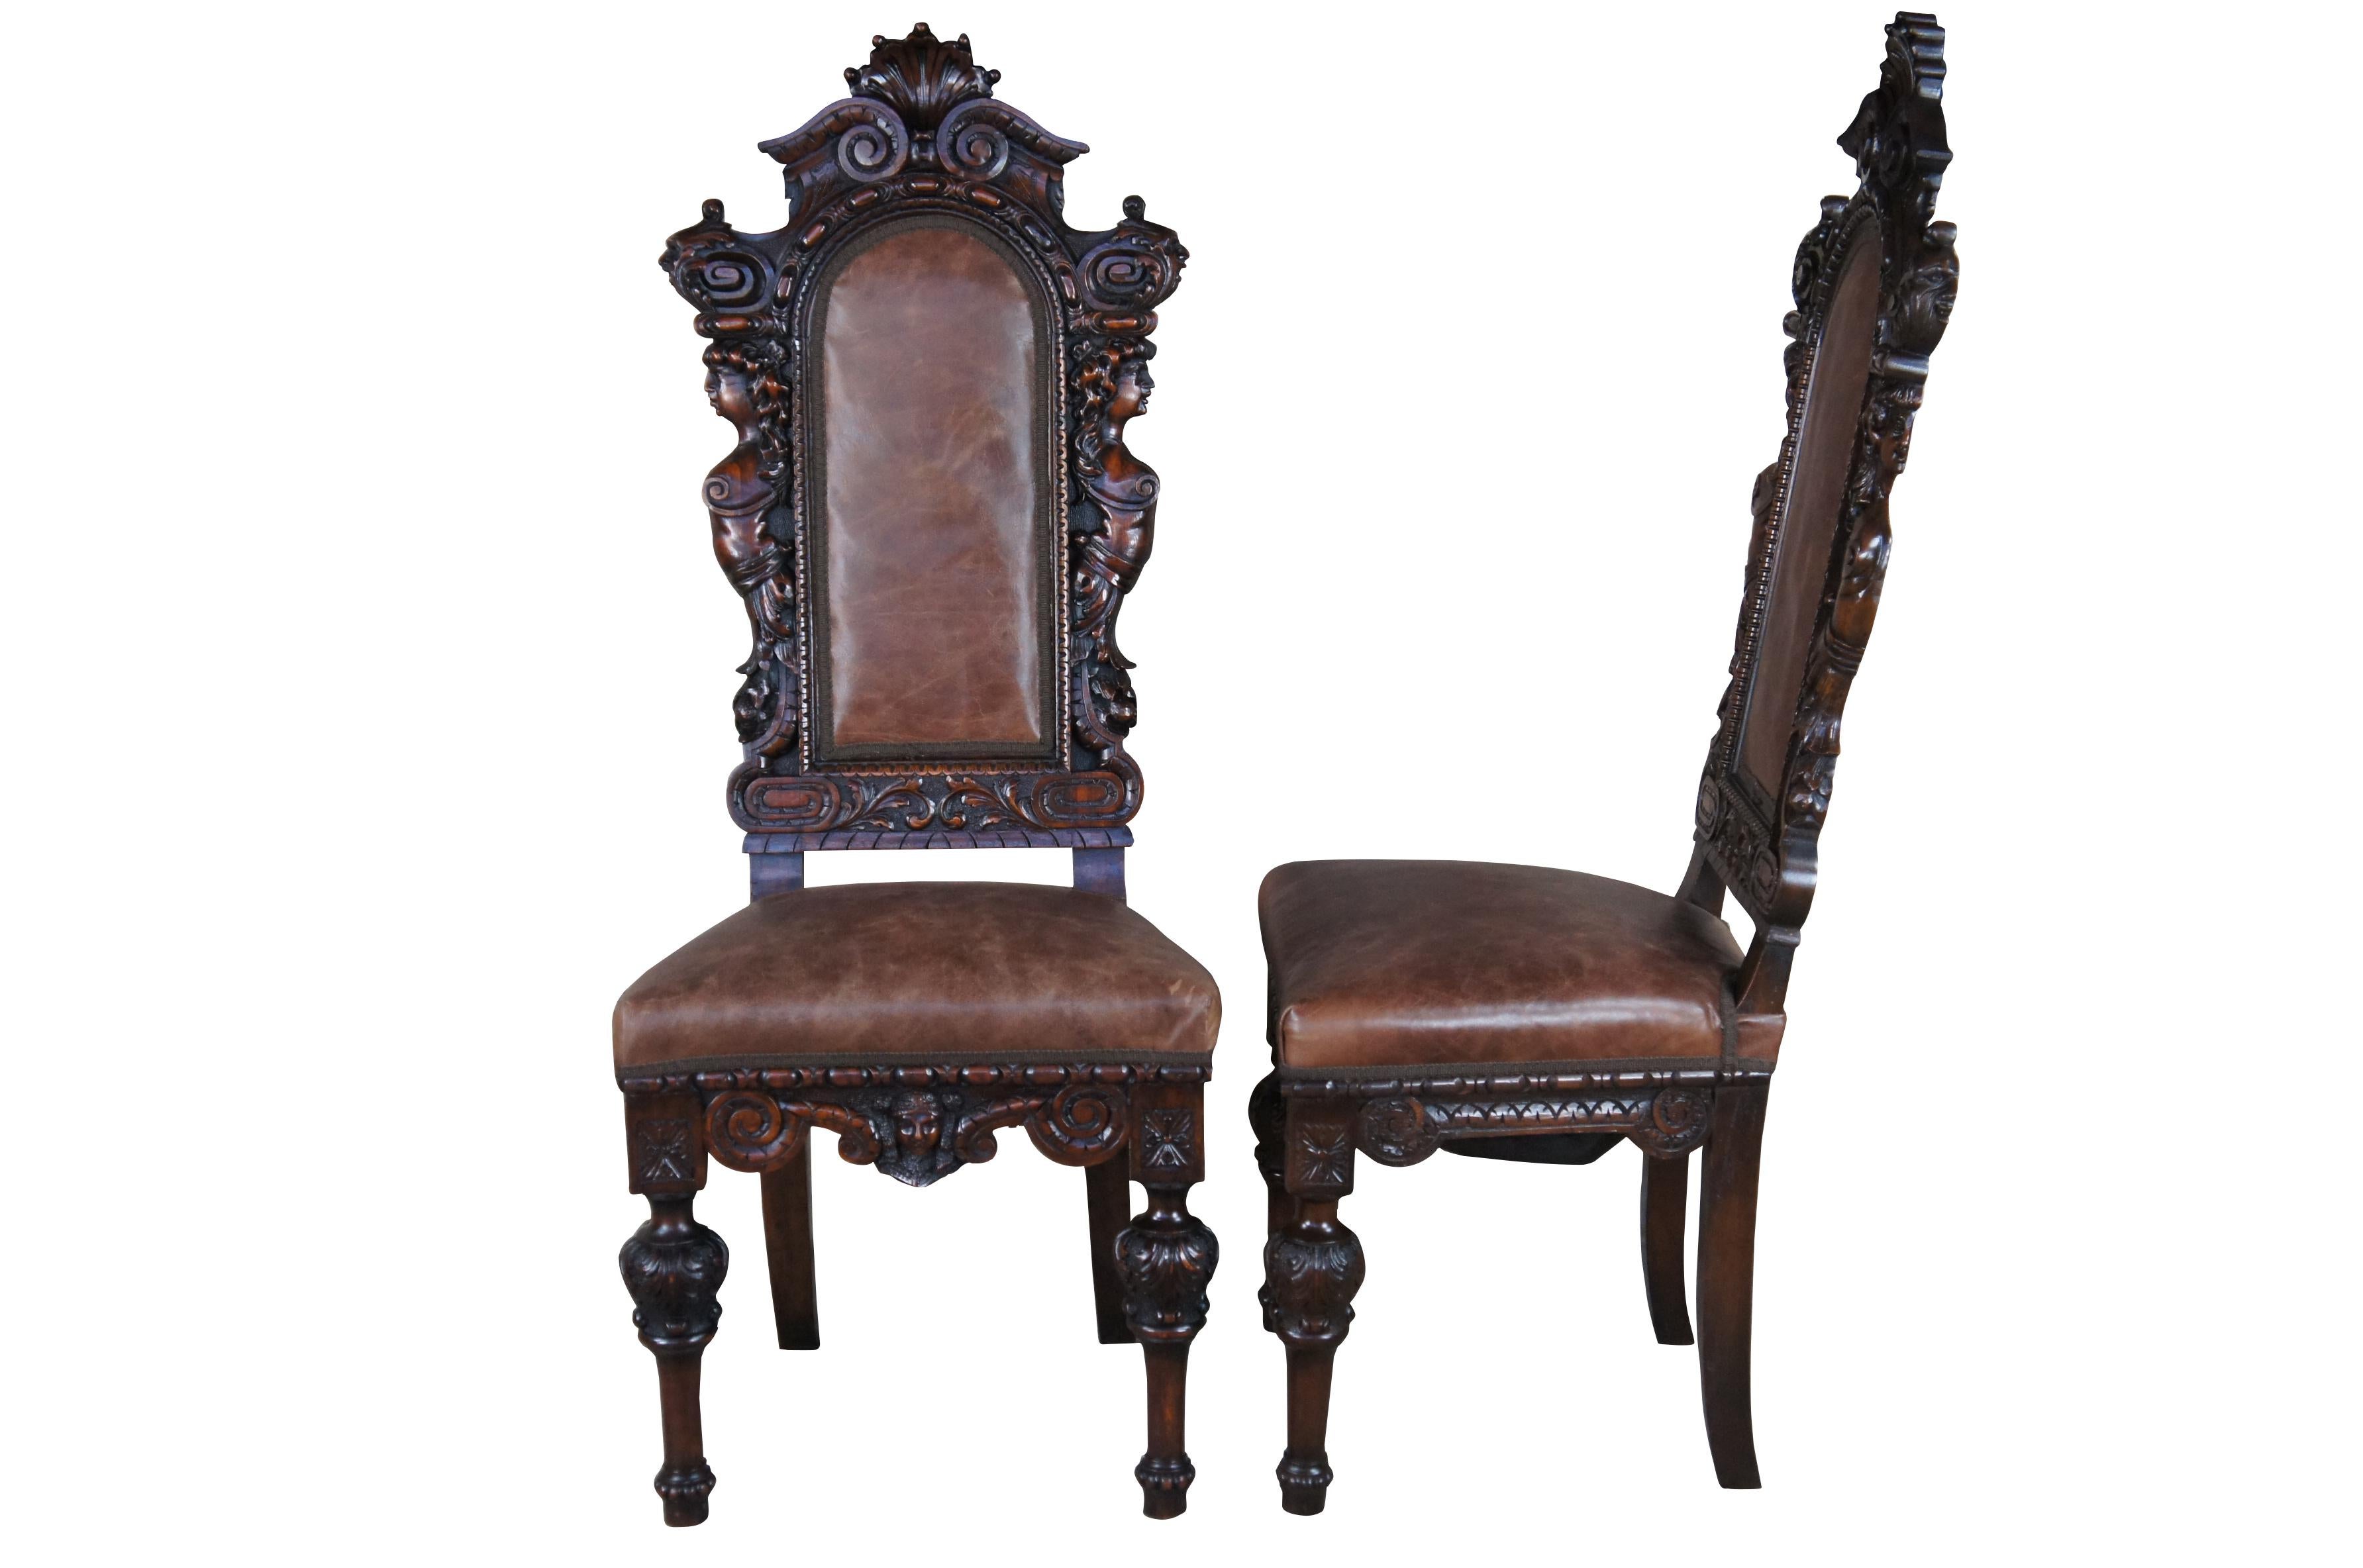 European 18 Monumental Antique Italian Renaissance Figural Mahogany Leather Dining Chairs For Sale